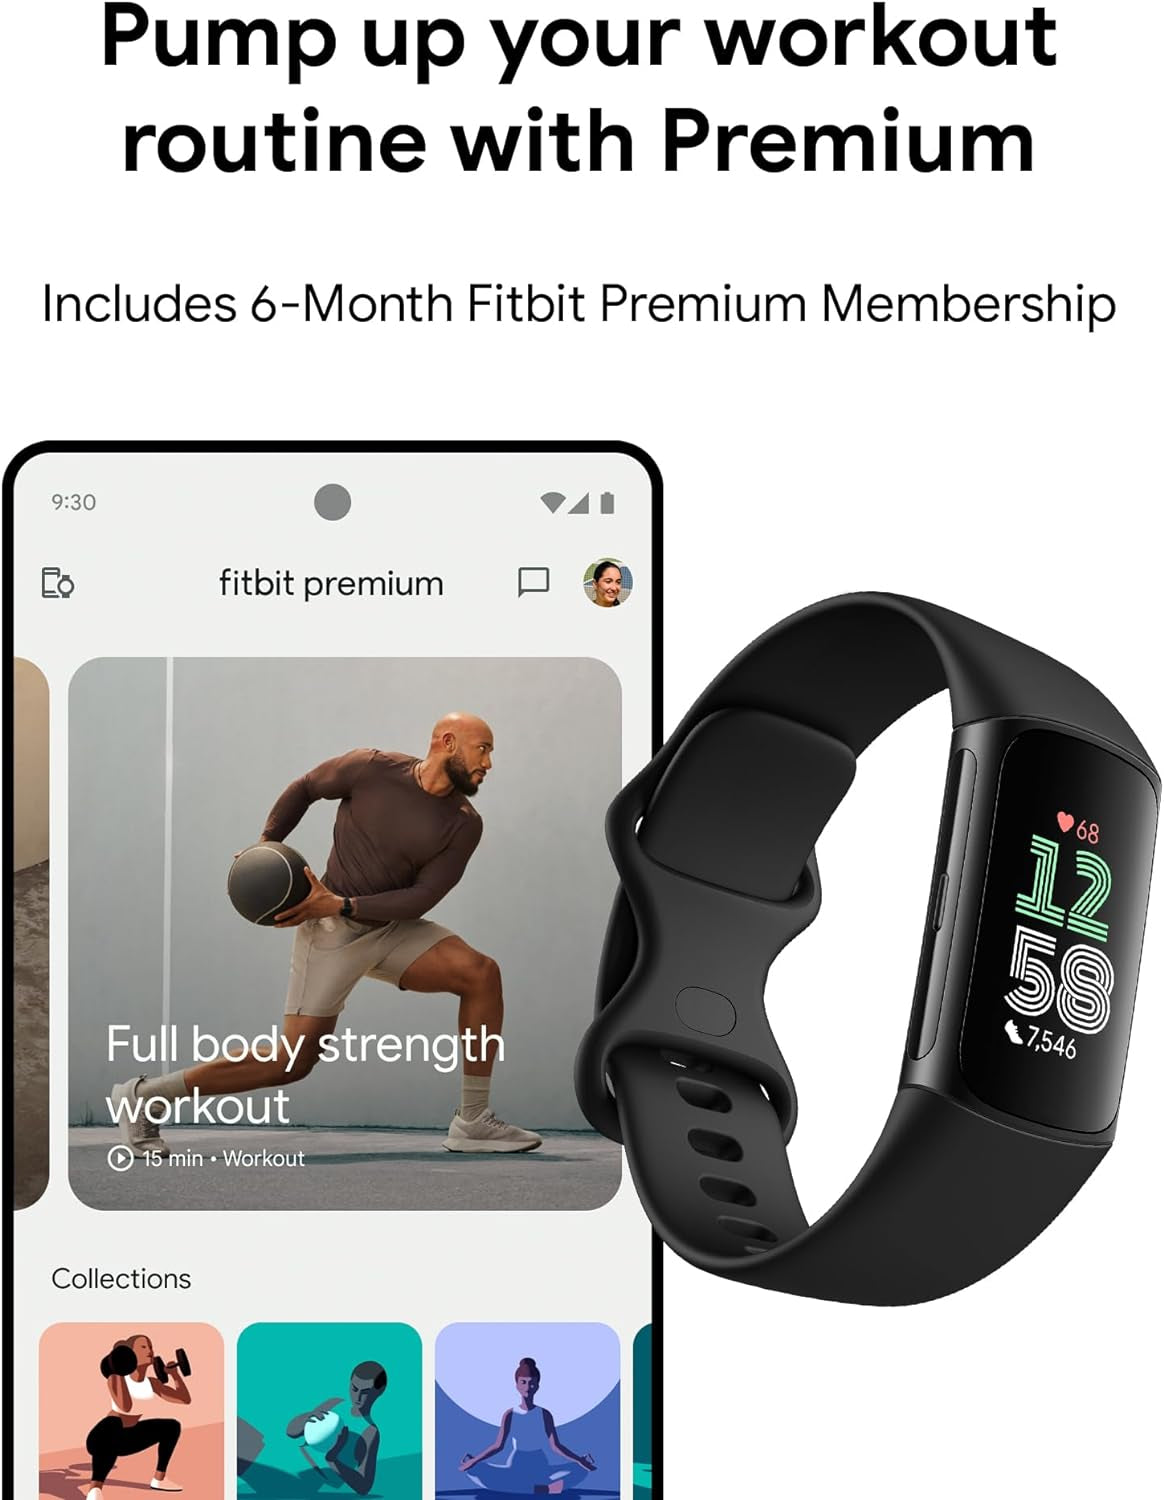 Charge 6 Fitness Tracker with Google Apps, Heart Rate on Exercise Equipment, 6-Months Premium Membership Included, GPS, Health Tools and More, Obsidian/Black, One Size (S & L Bands Included)